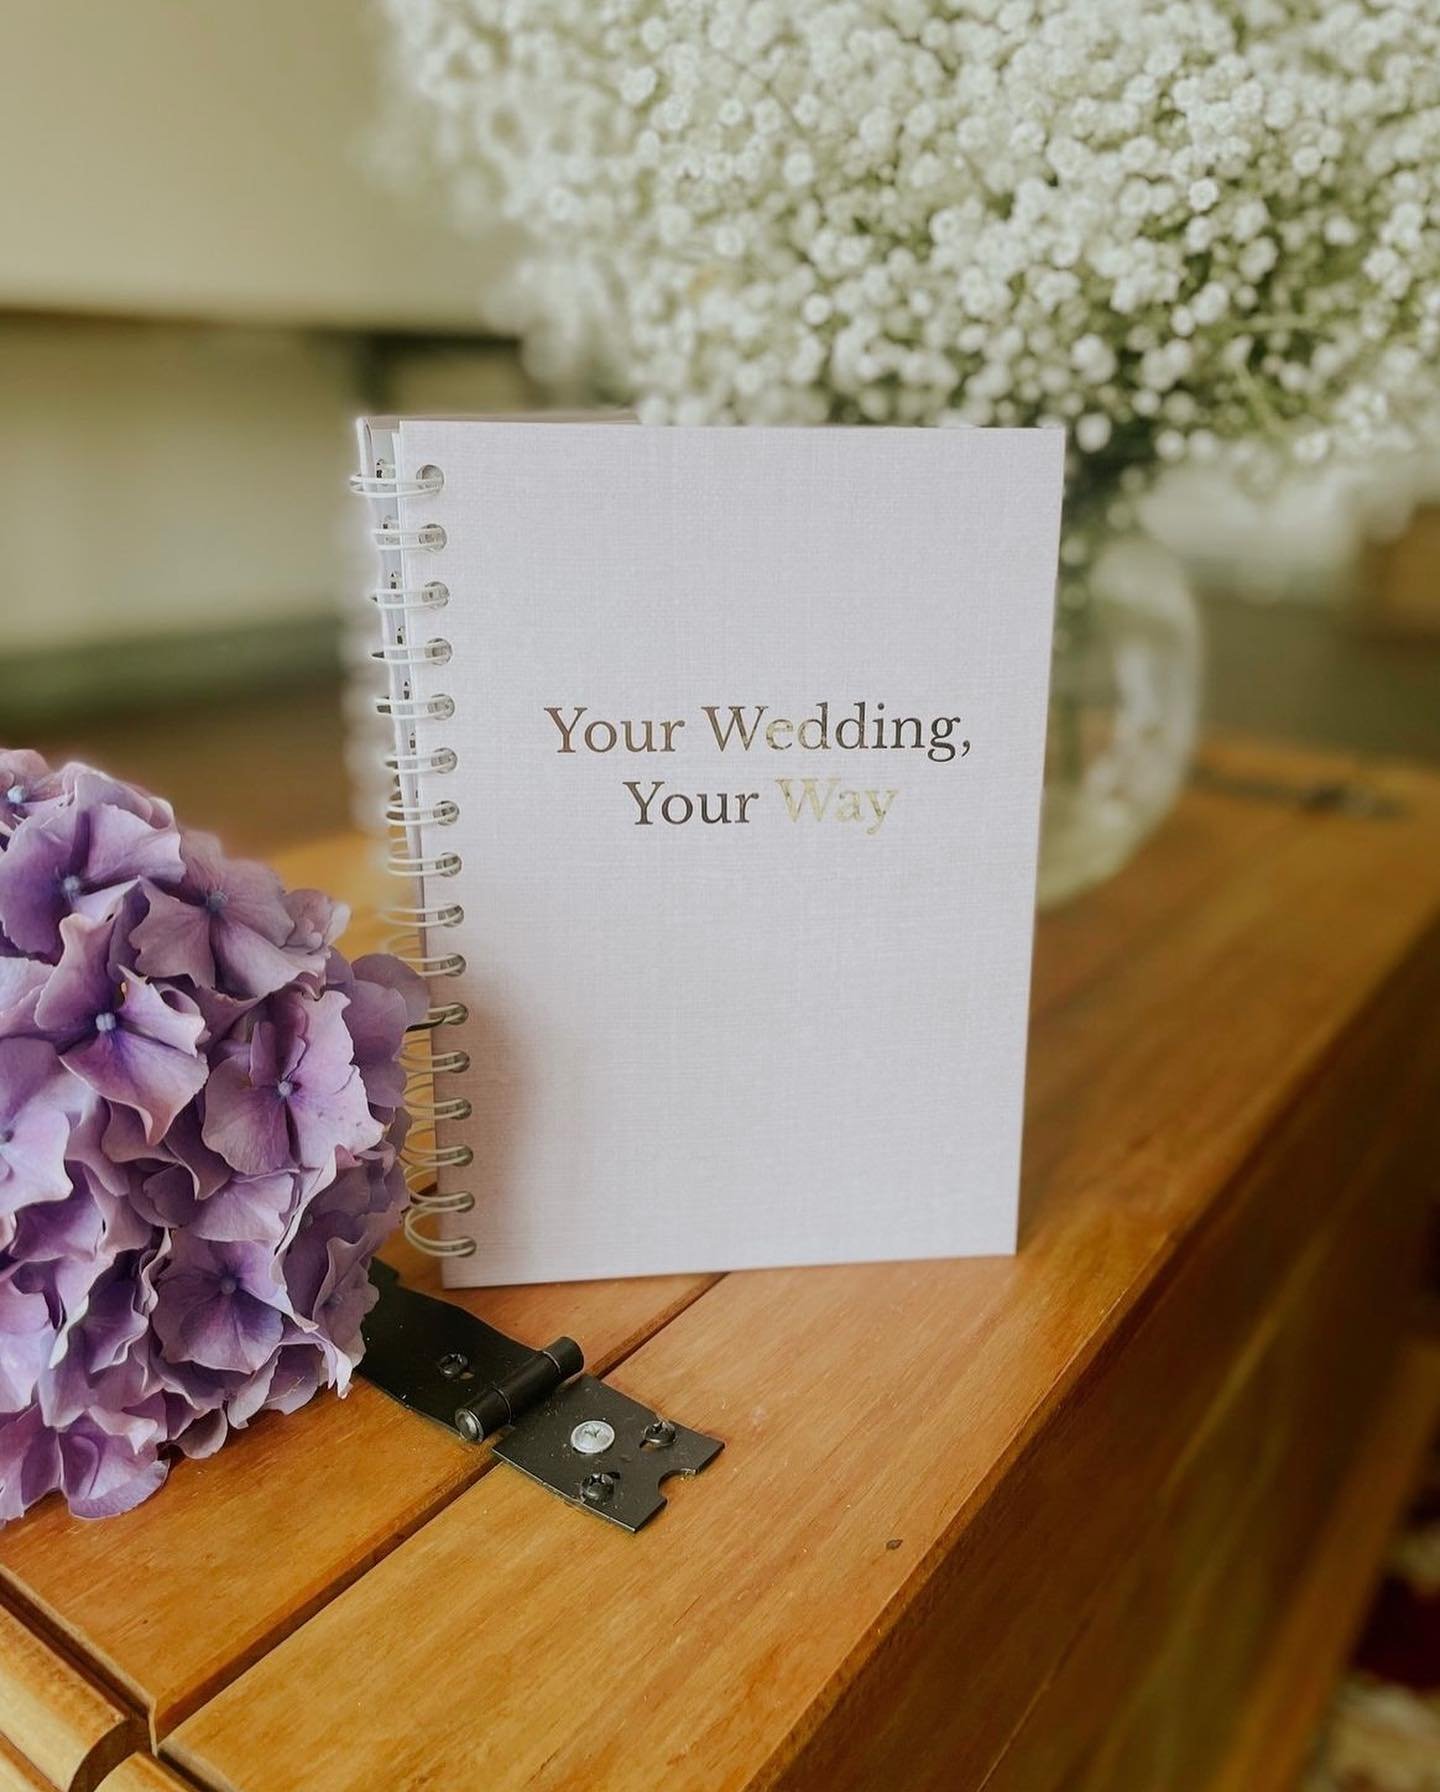 Buy our wedding planner before the end of April and get FREE postage! 💖

Head to the link in our bio to your yours and use discount code: FREEPOSTAGE at check out 🫶